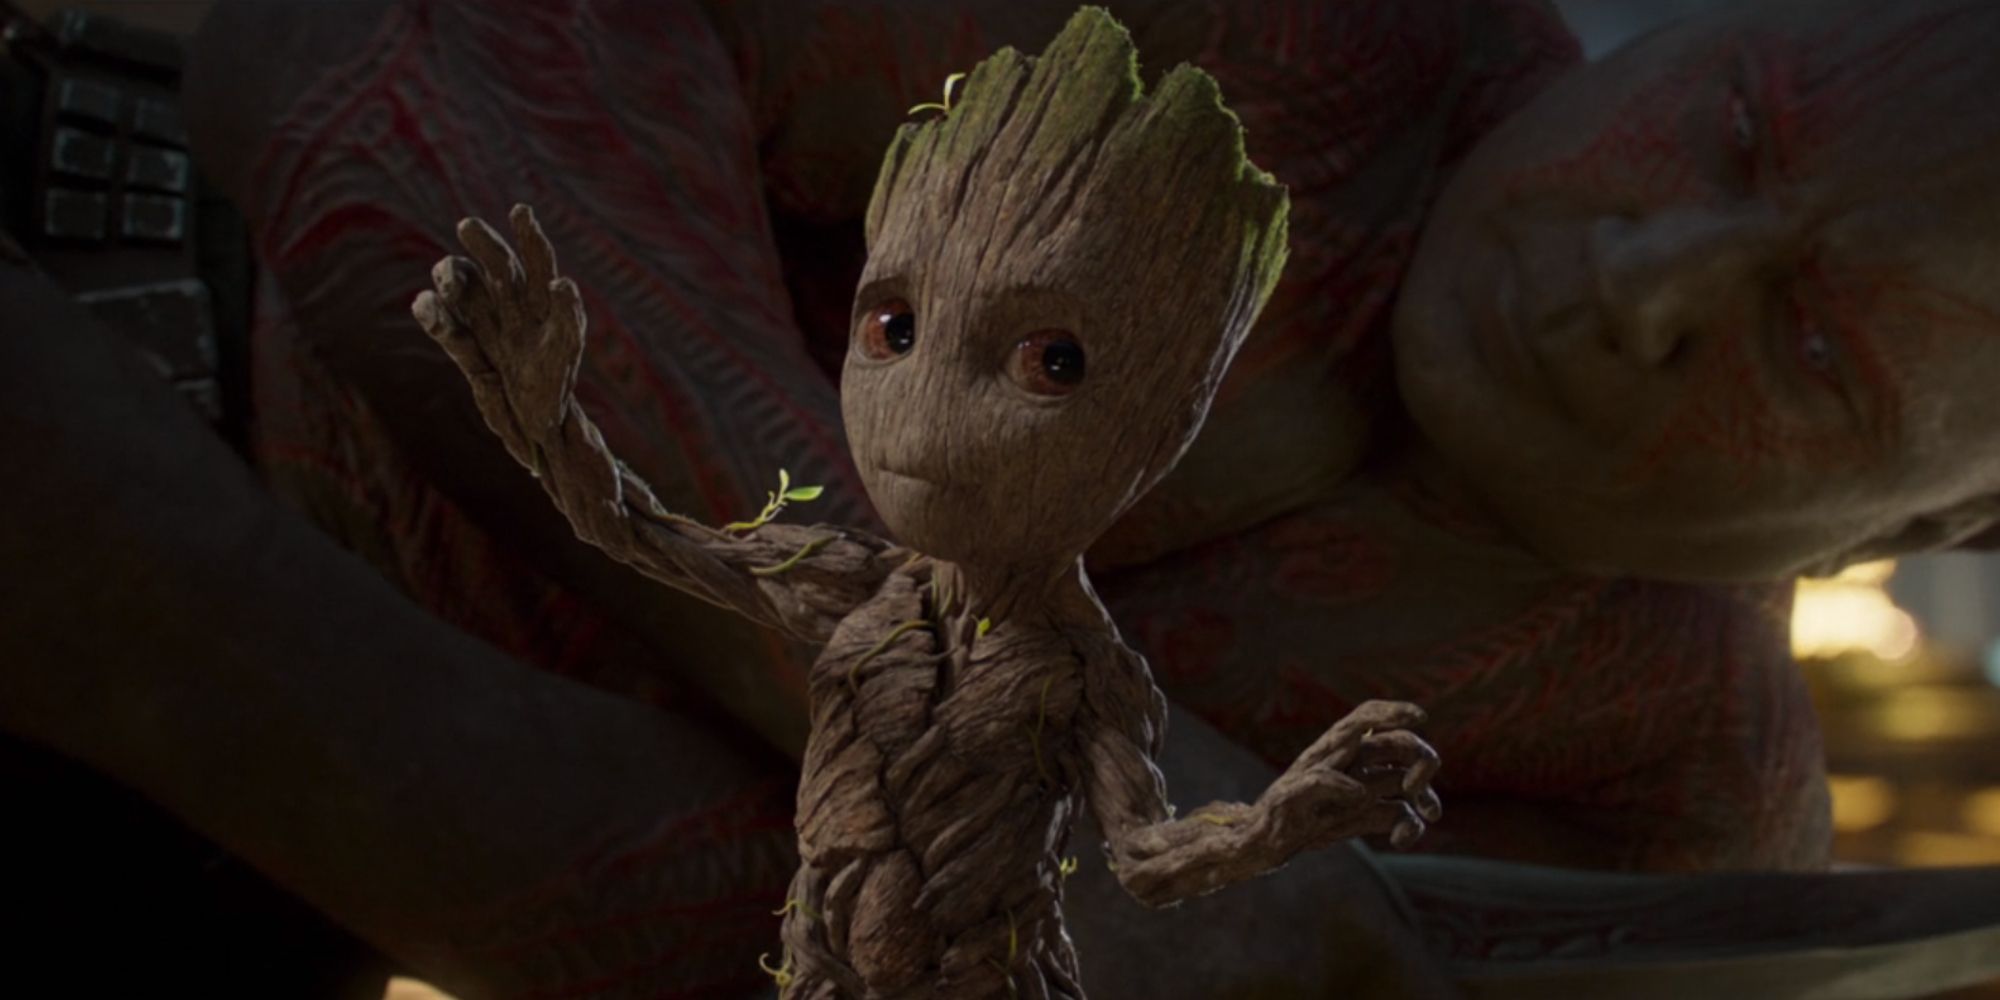 Baby Groot frozen in place before Drax in Guardians Of The Galaxy Vol. 2